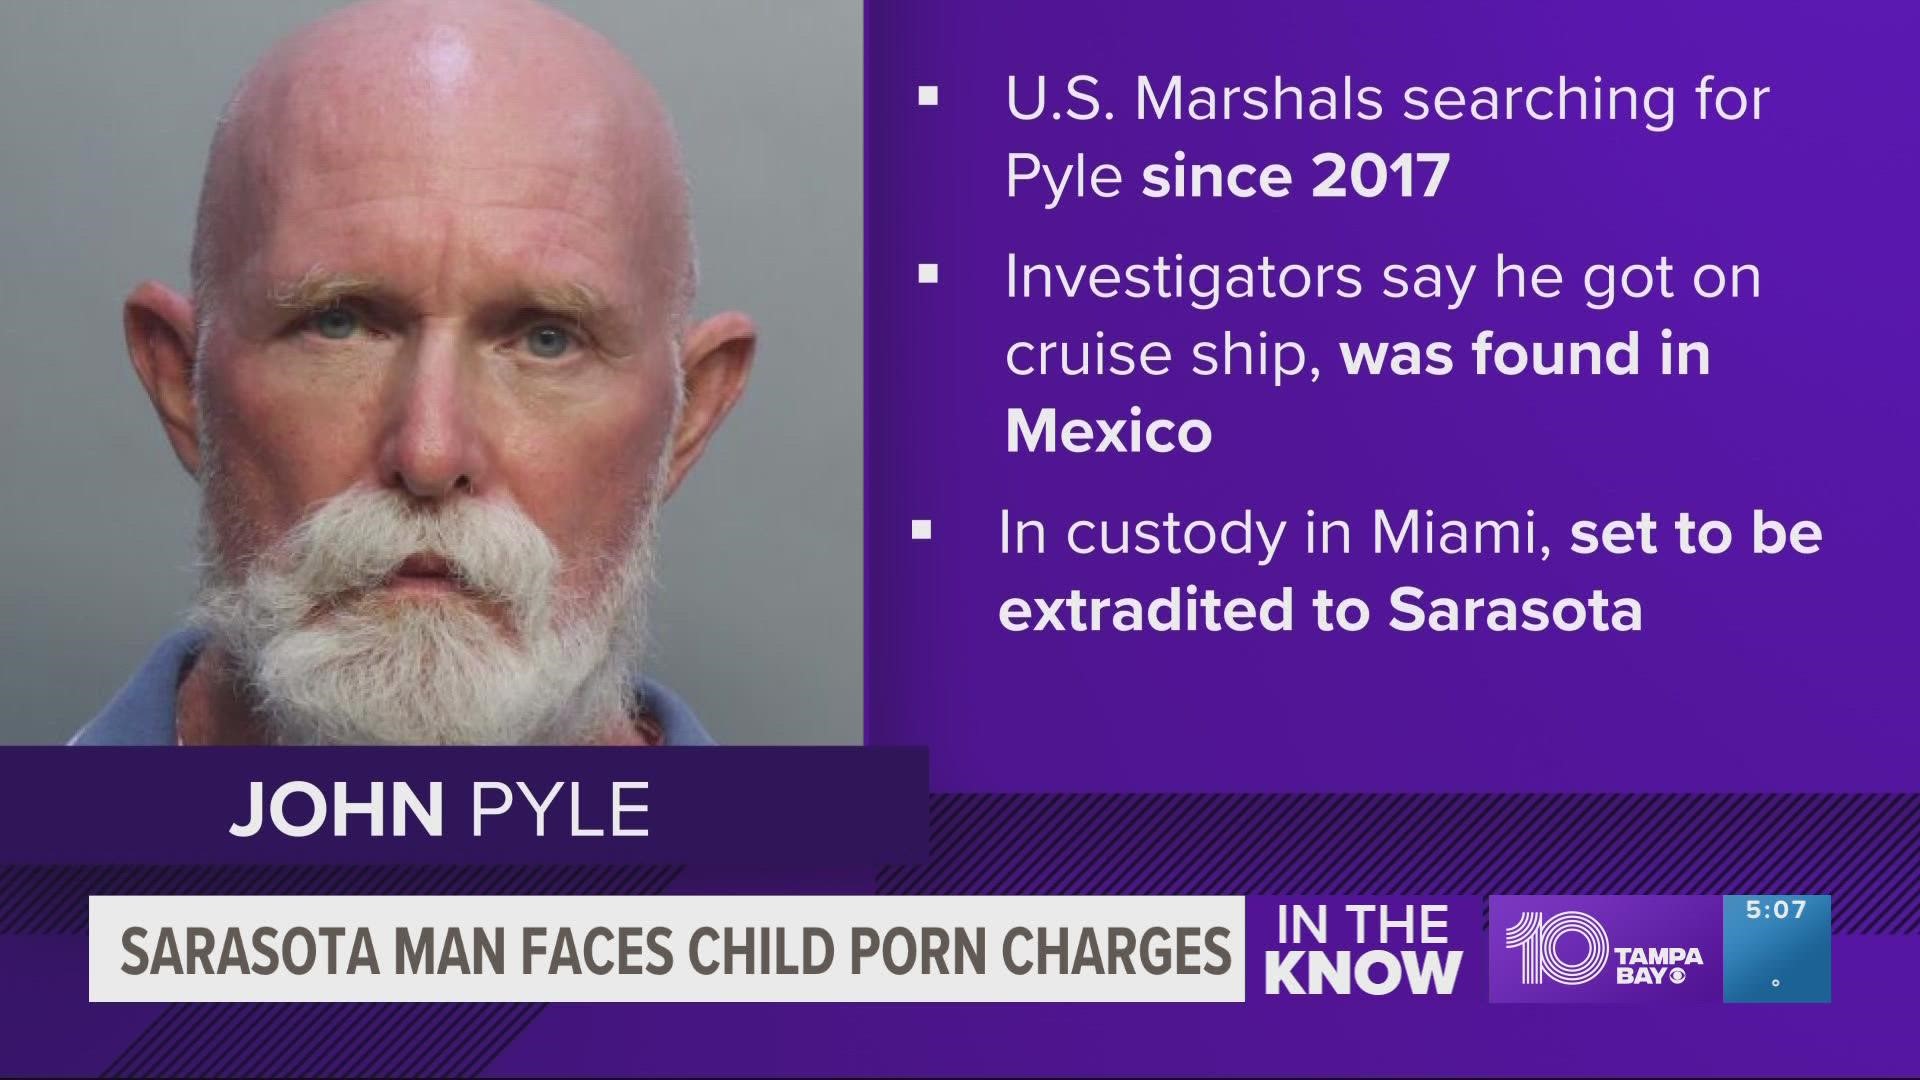 John Pyle was arrested on child porn charges in 2016 and failed to show up to a court hearing the following year.